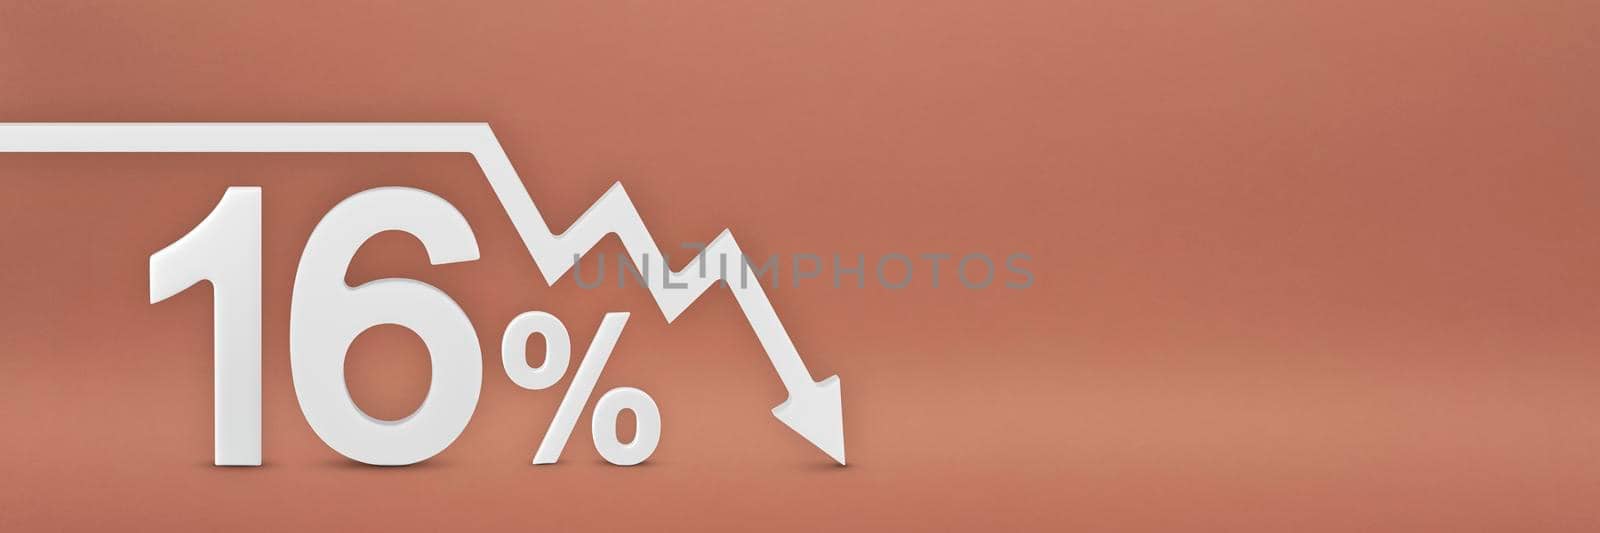 sixteen percent, the arrow on the graph is pointing down. Stock market crash, bear market, inflation. Economic collapse, collapse of stocks. 3d banner, 16 percent discount sign on a red background. by SERSOL